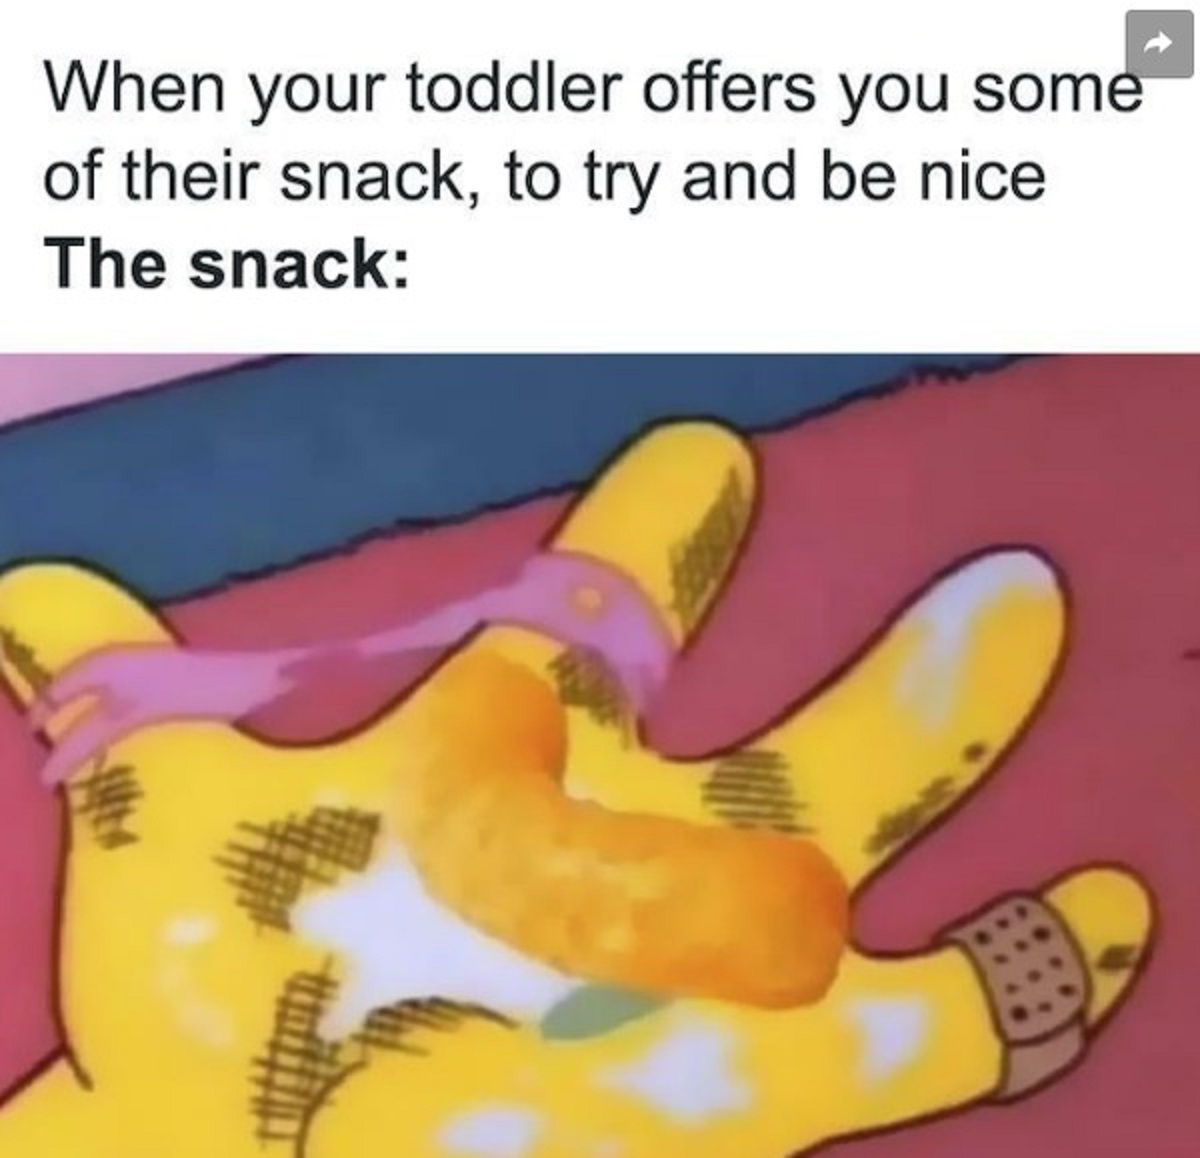 cartoon - When your toddler offers you some of their snack, to try and be nice The snack